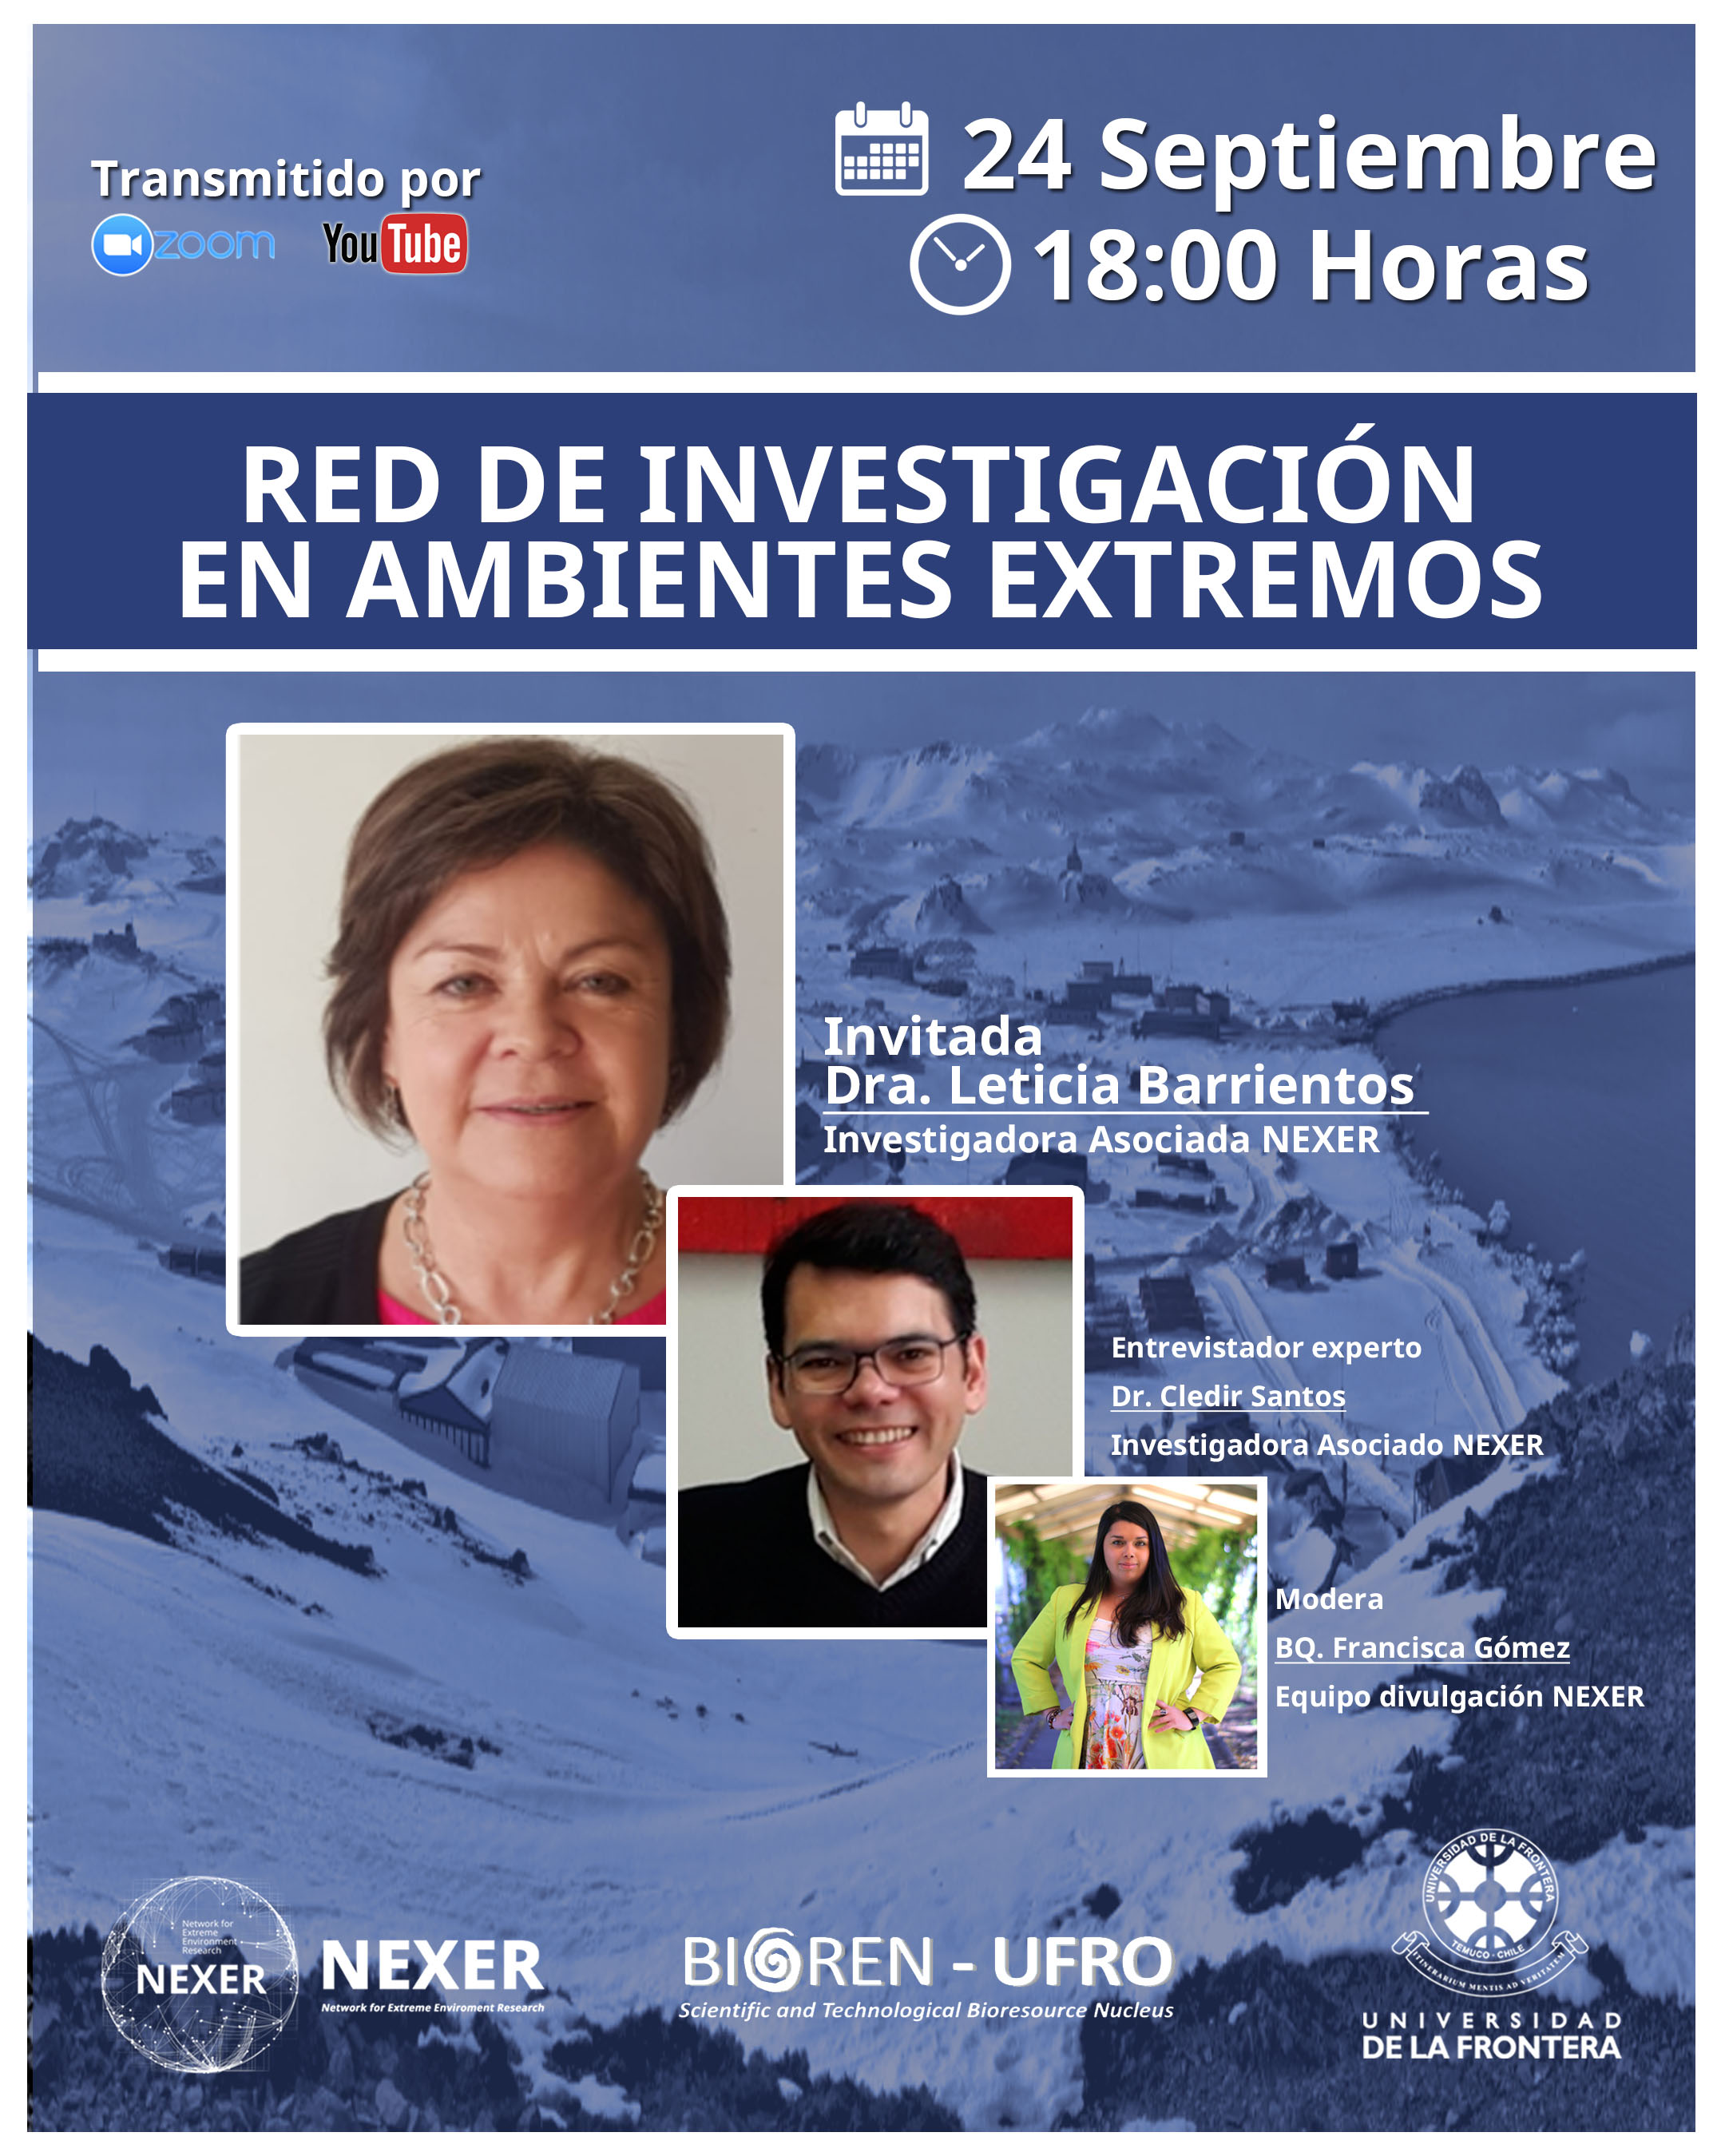 WEBINAR: Network for Extreme Environments Research featuring Dr. Leticia Barrientos